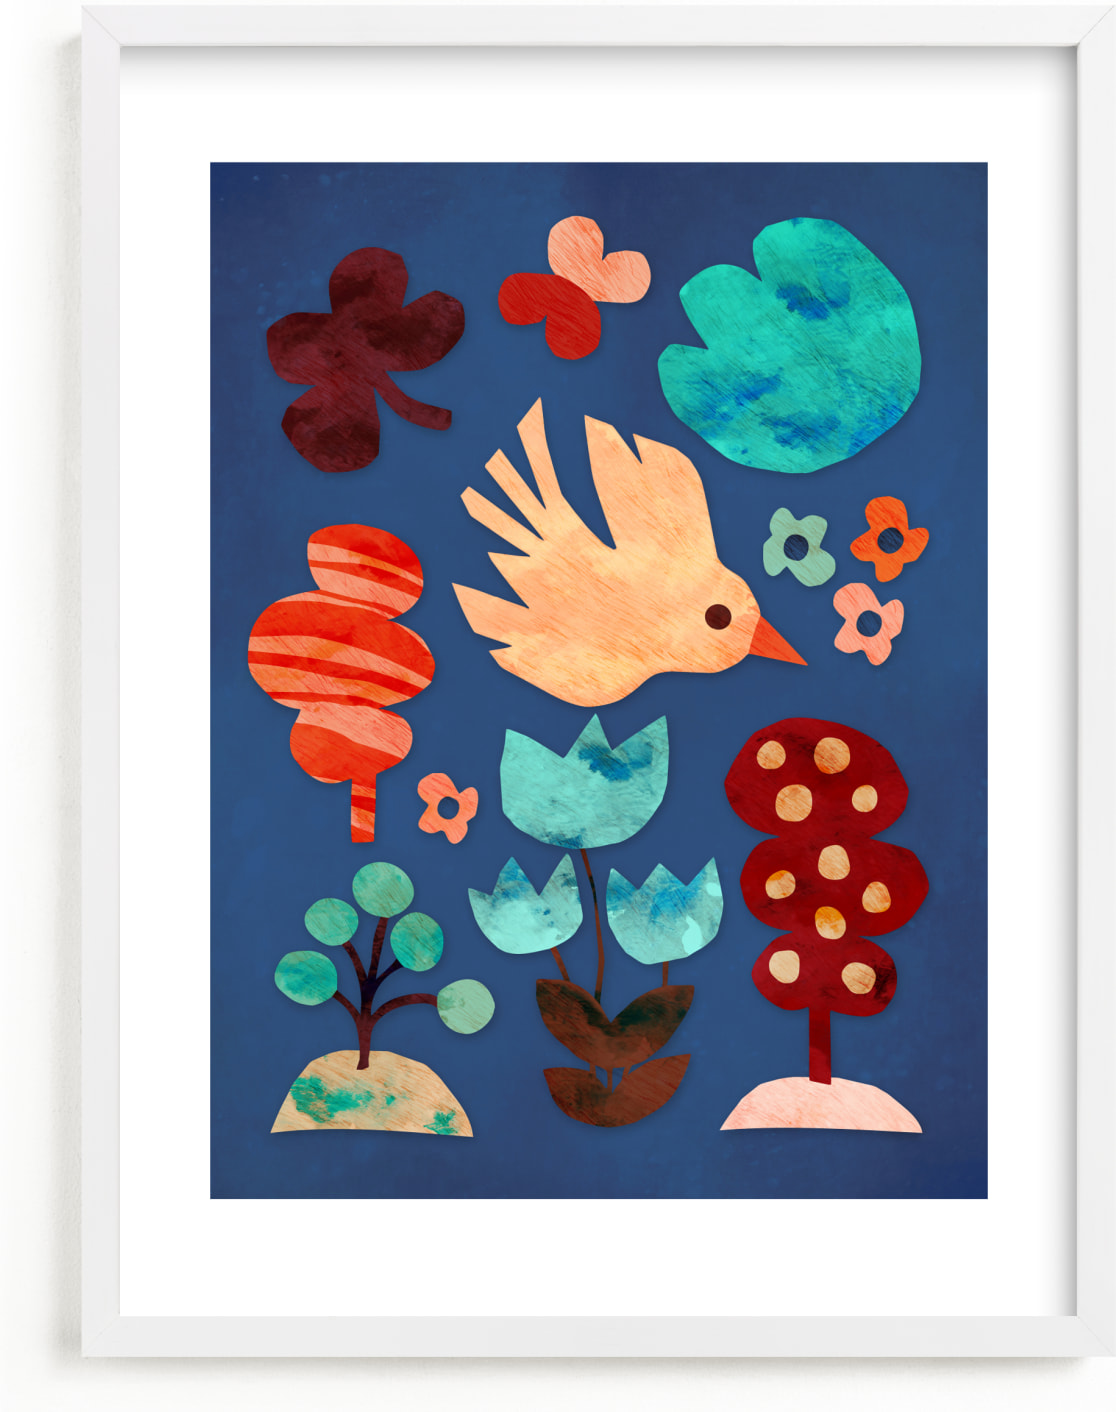 This is a blue kids wall art by Mojca Dolinar called Bird and the forest.